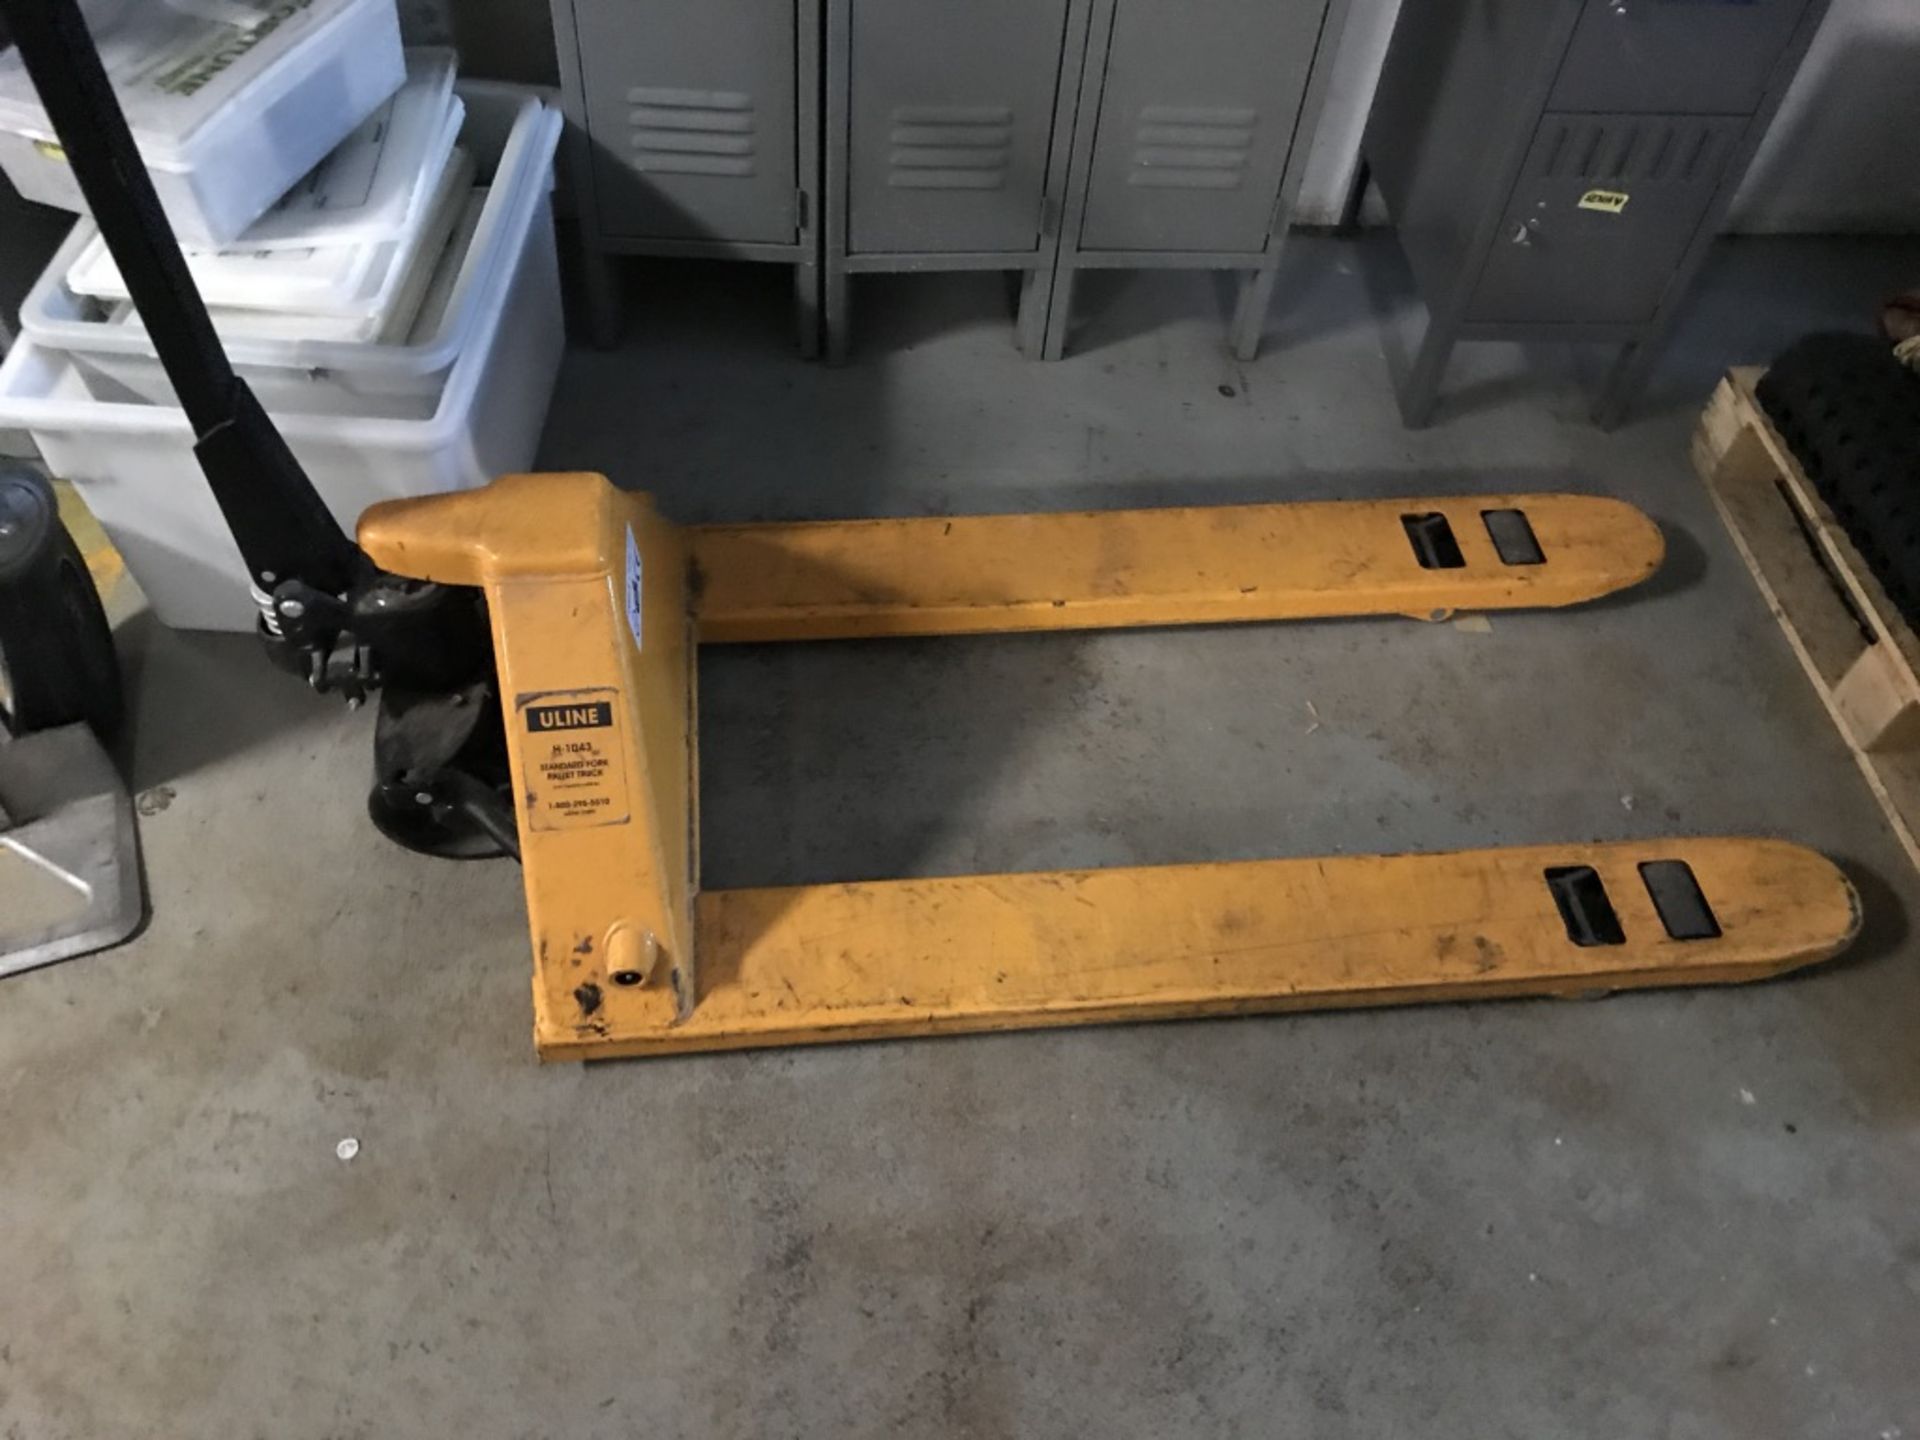 U-LINE STANDARD FORK PALLET JACK, 5500LB CAPACITY (MUST BE PICKED UP ON LAST 2 DAYS OF REMOVAL) - Image 4 of 6